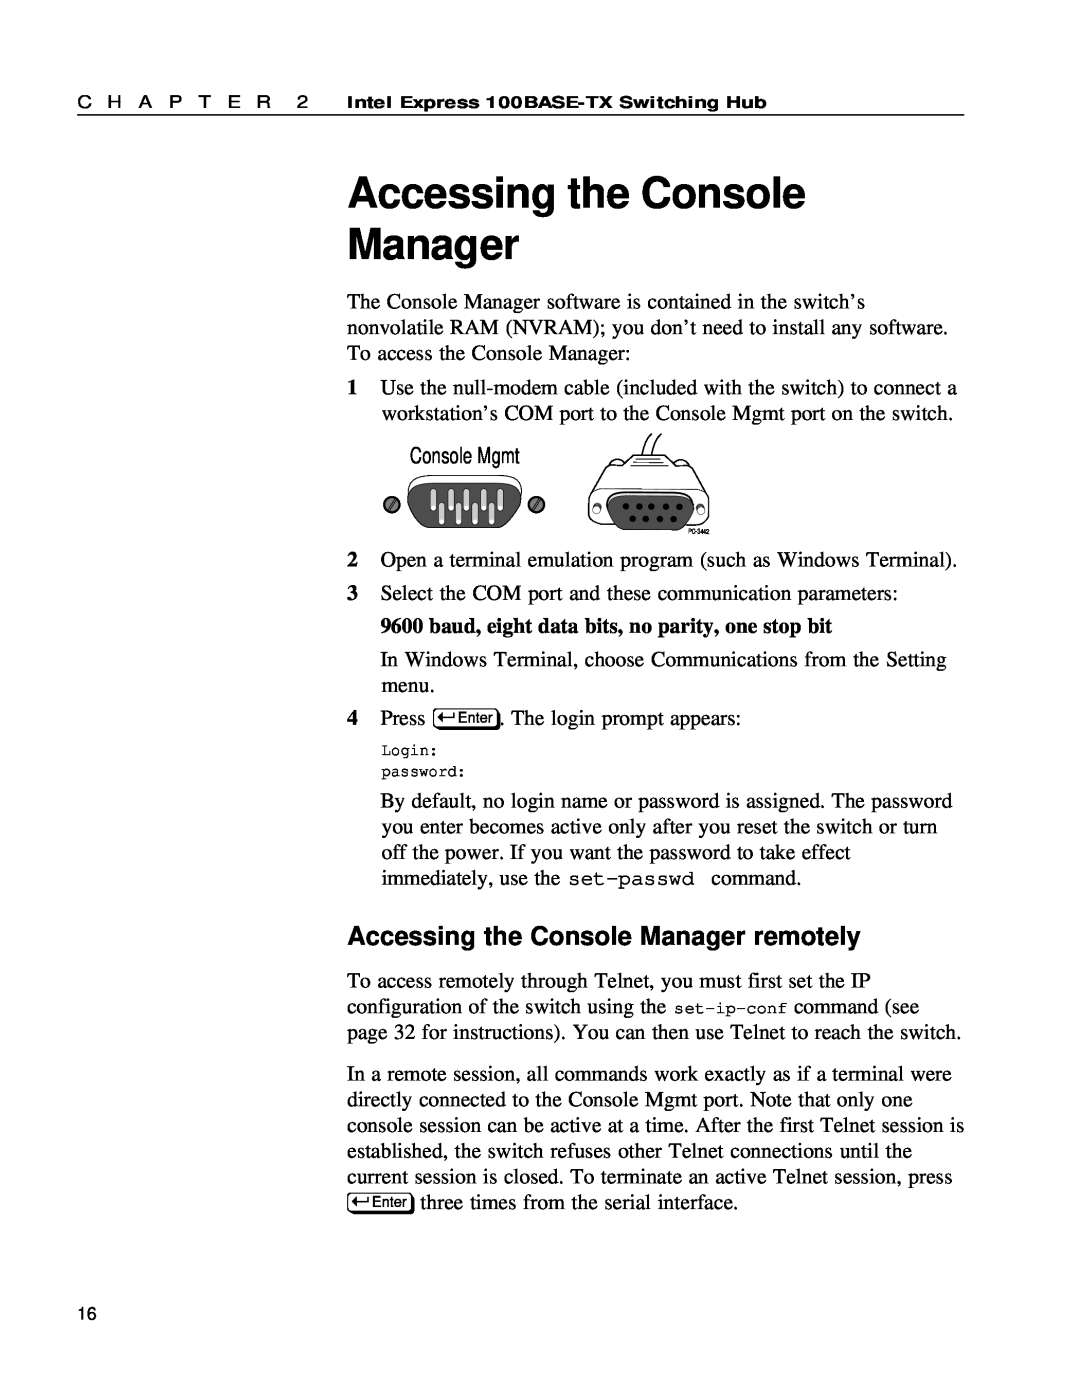 Intel 654655-001 manual Accessing the Console Manager remotely, Console Mgmt 